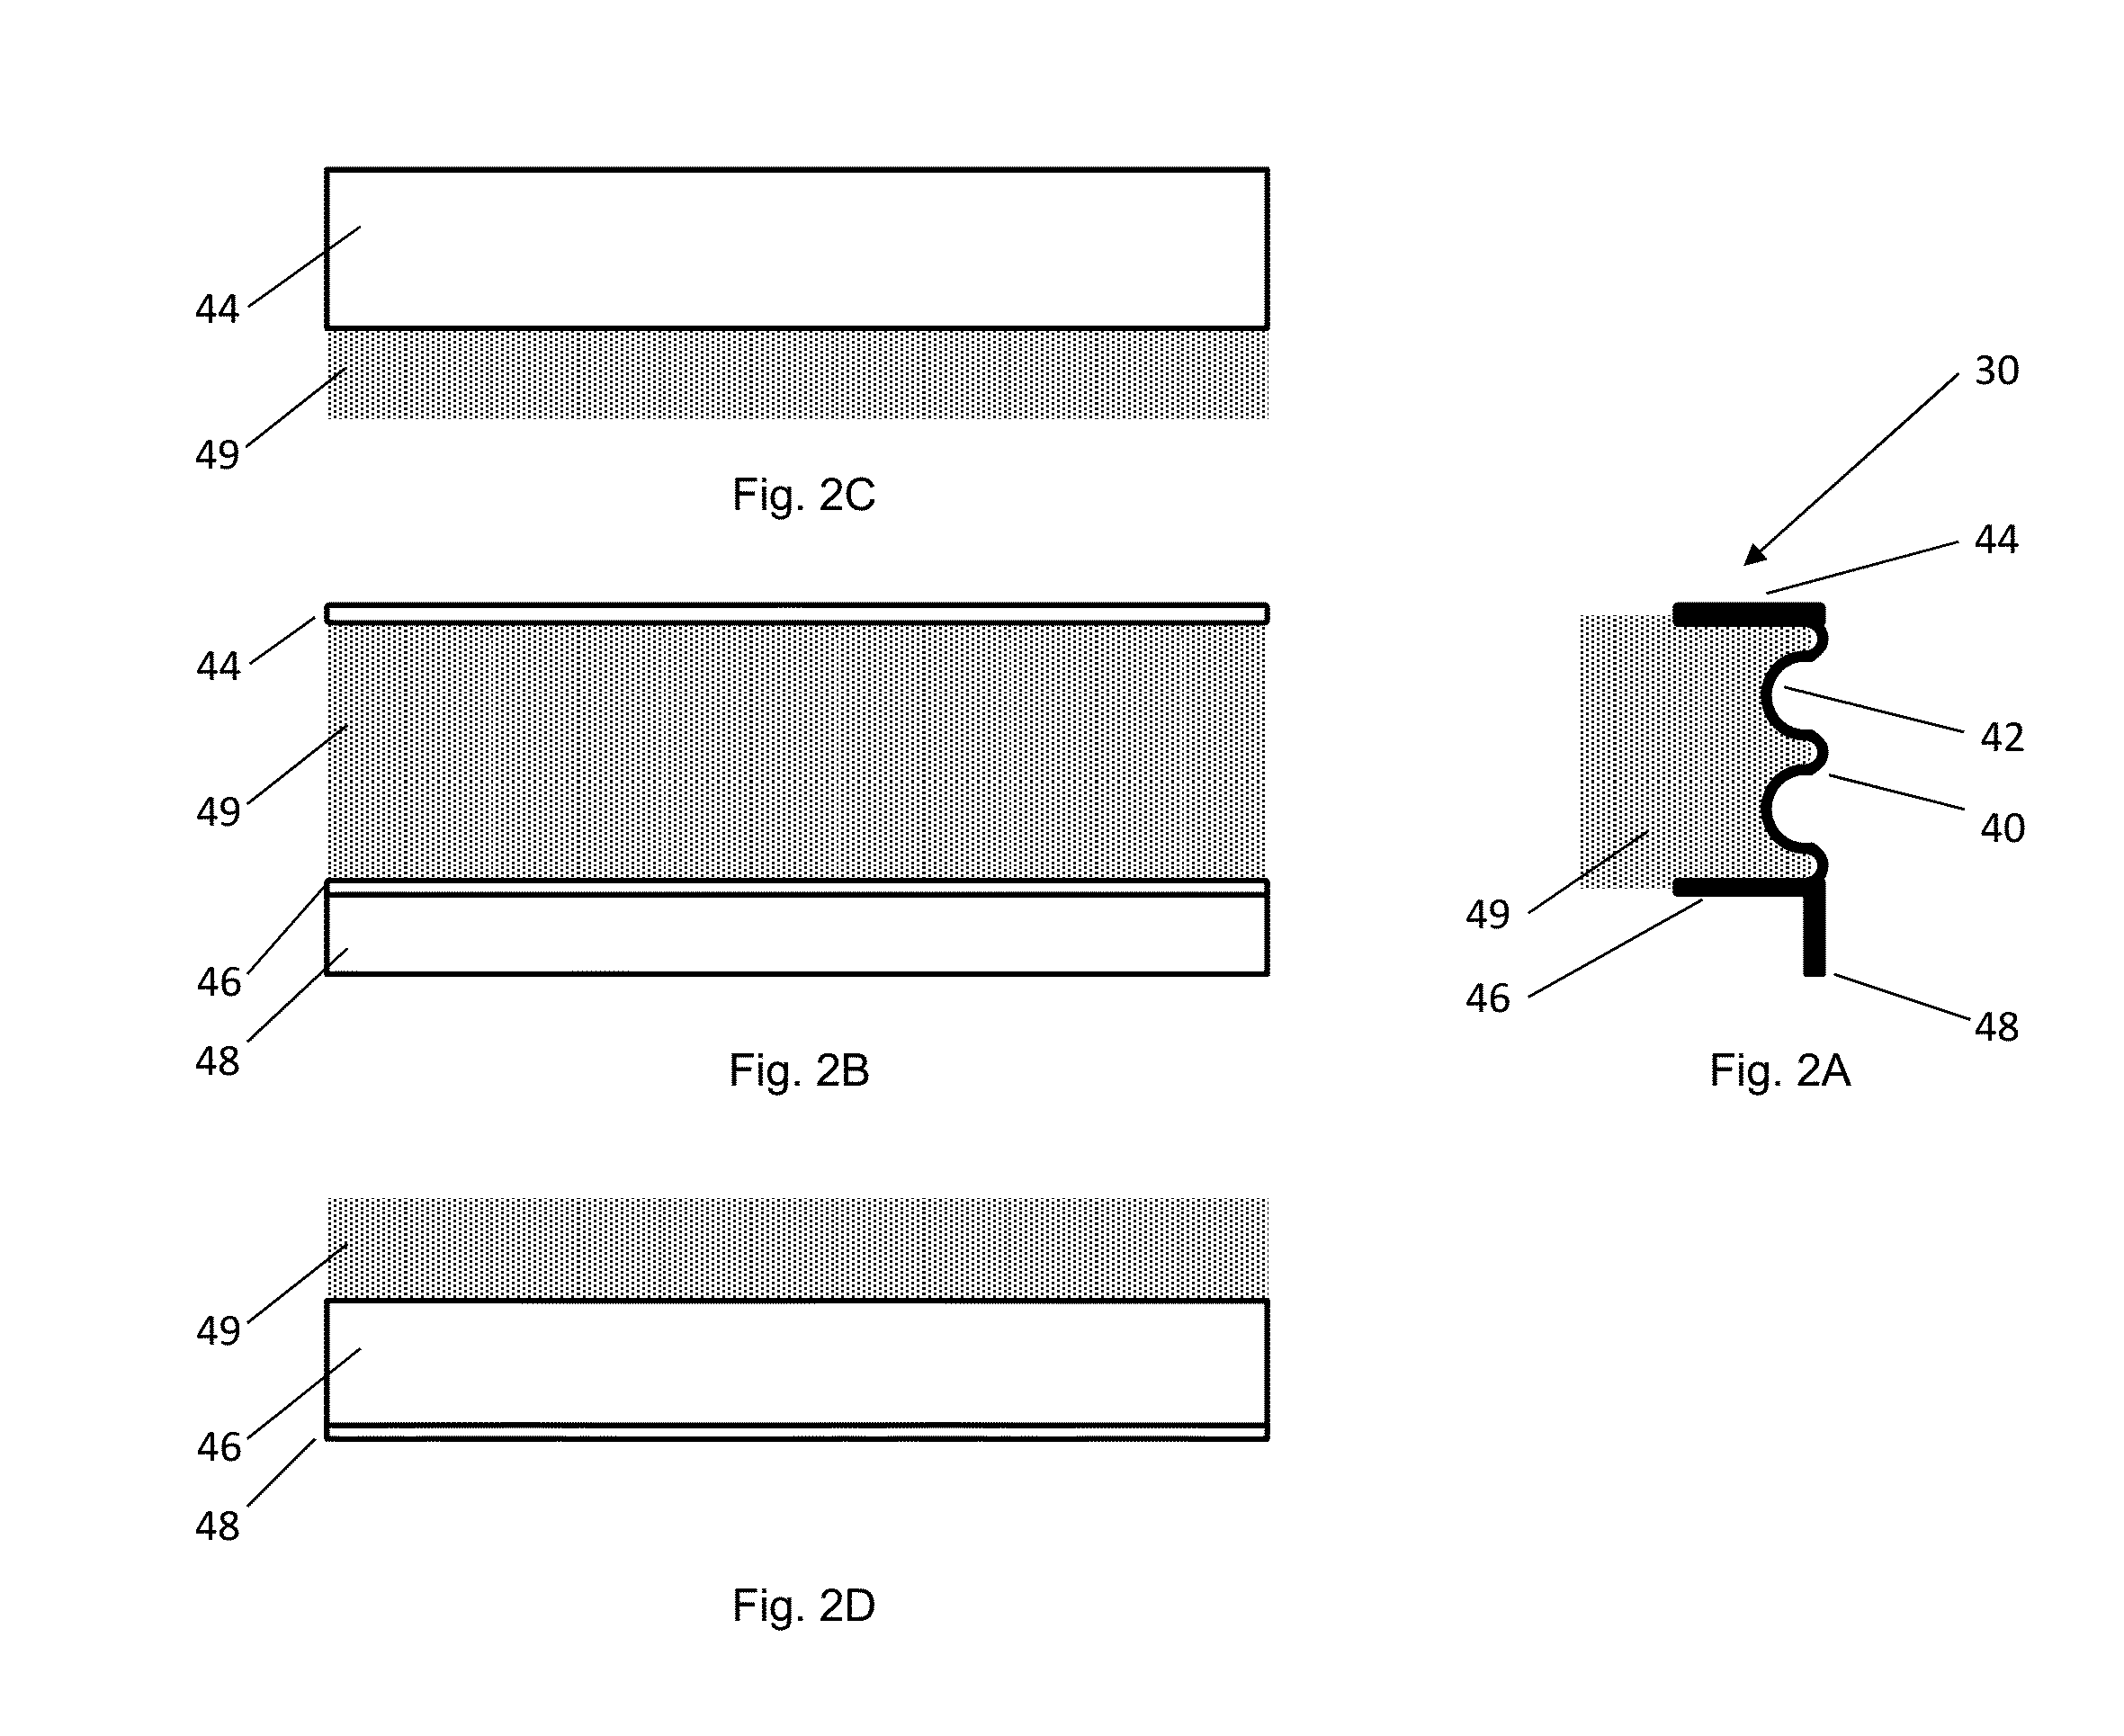 Containment devices for treatment of intestinal fistulas and complex wounds